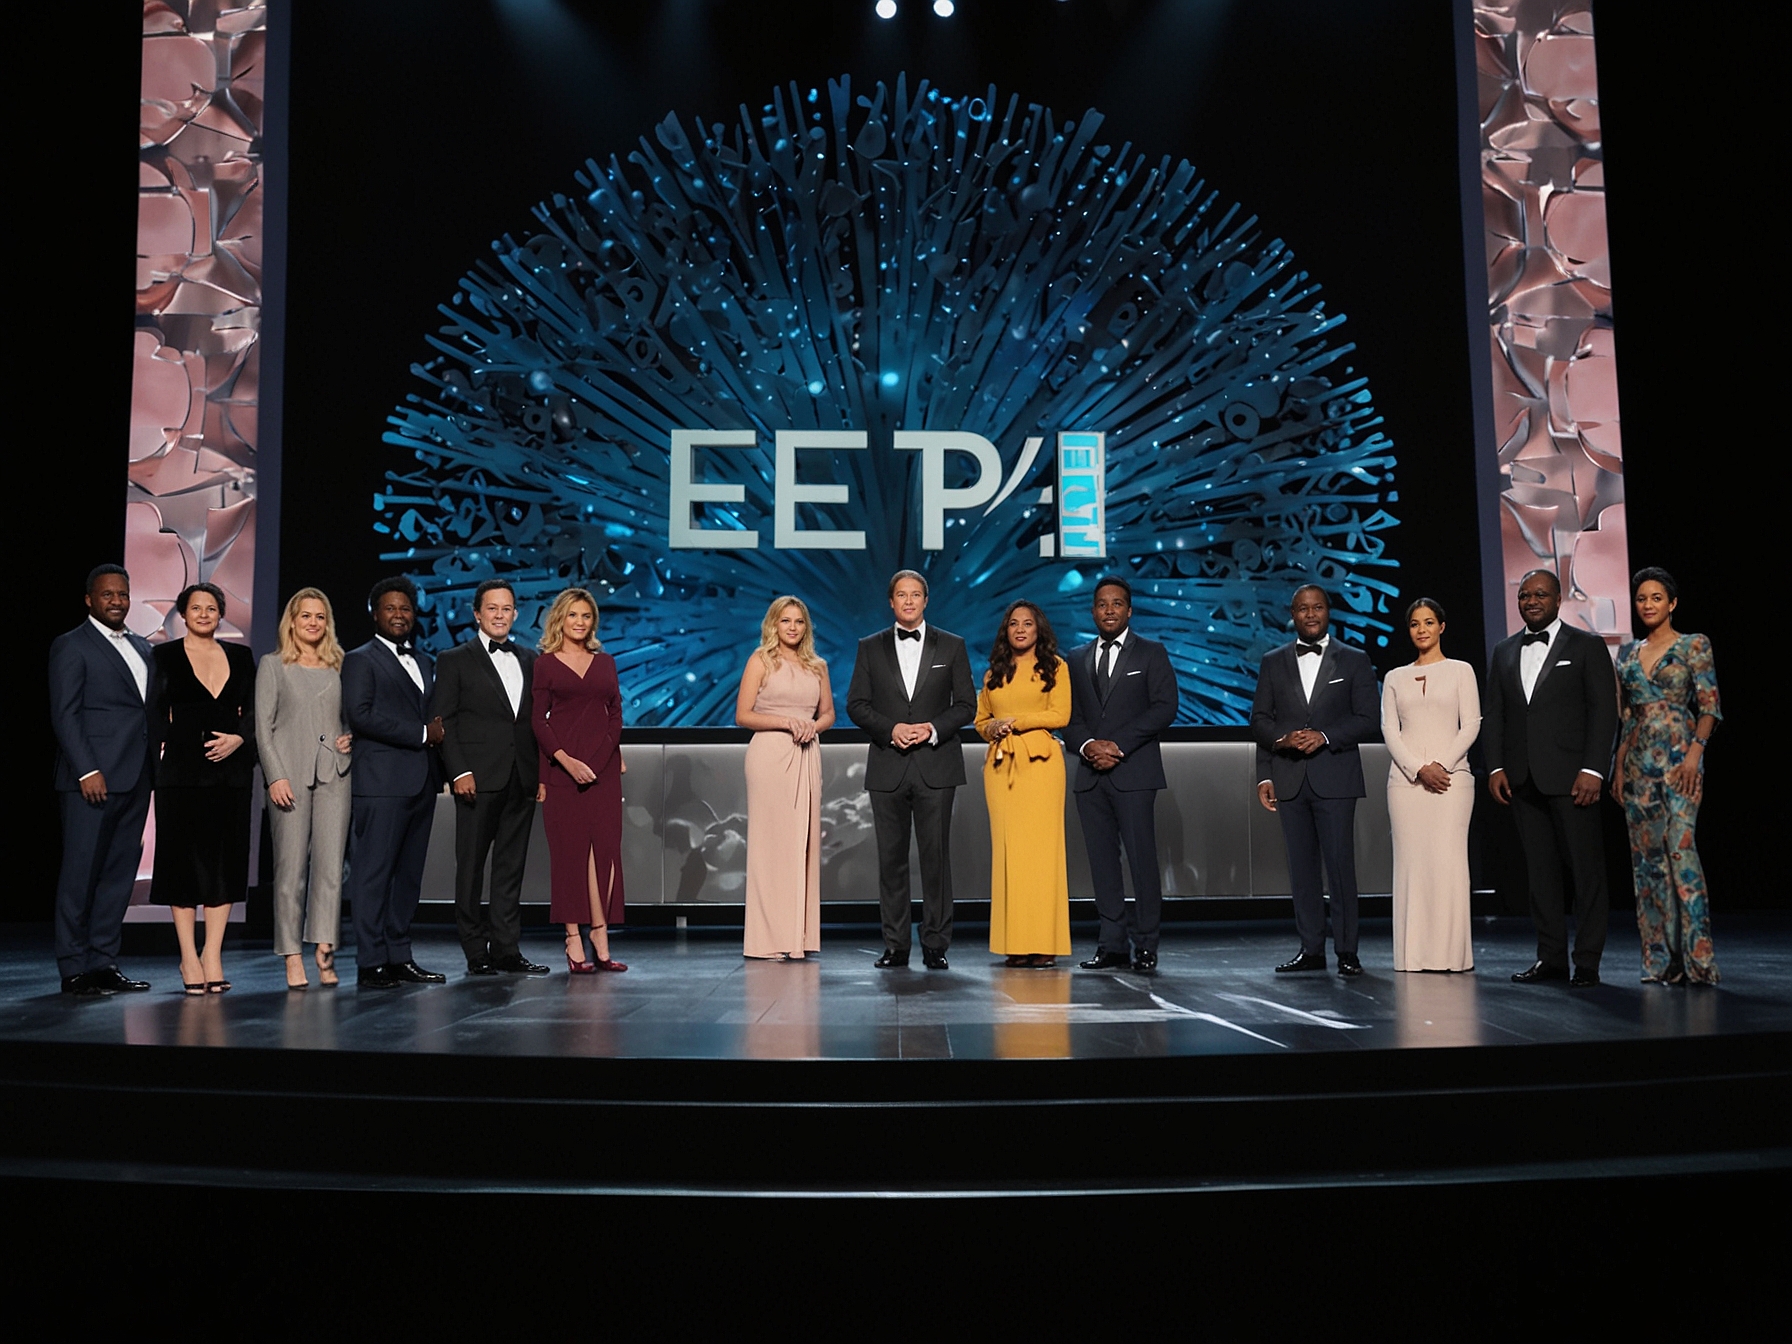 NBCUniversal and Group Black executives announce the launch of E!+ on Peacock, showcasing a diverse range of Black-led and produced media content on a stage with the E!+ logo displayed.